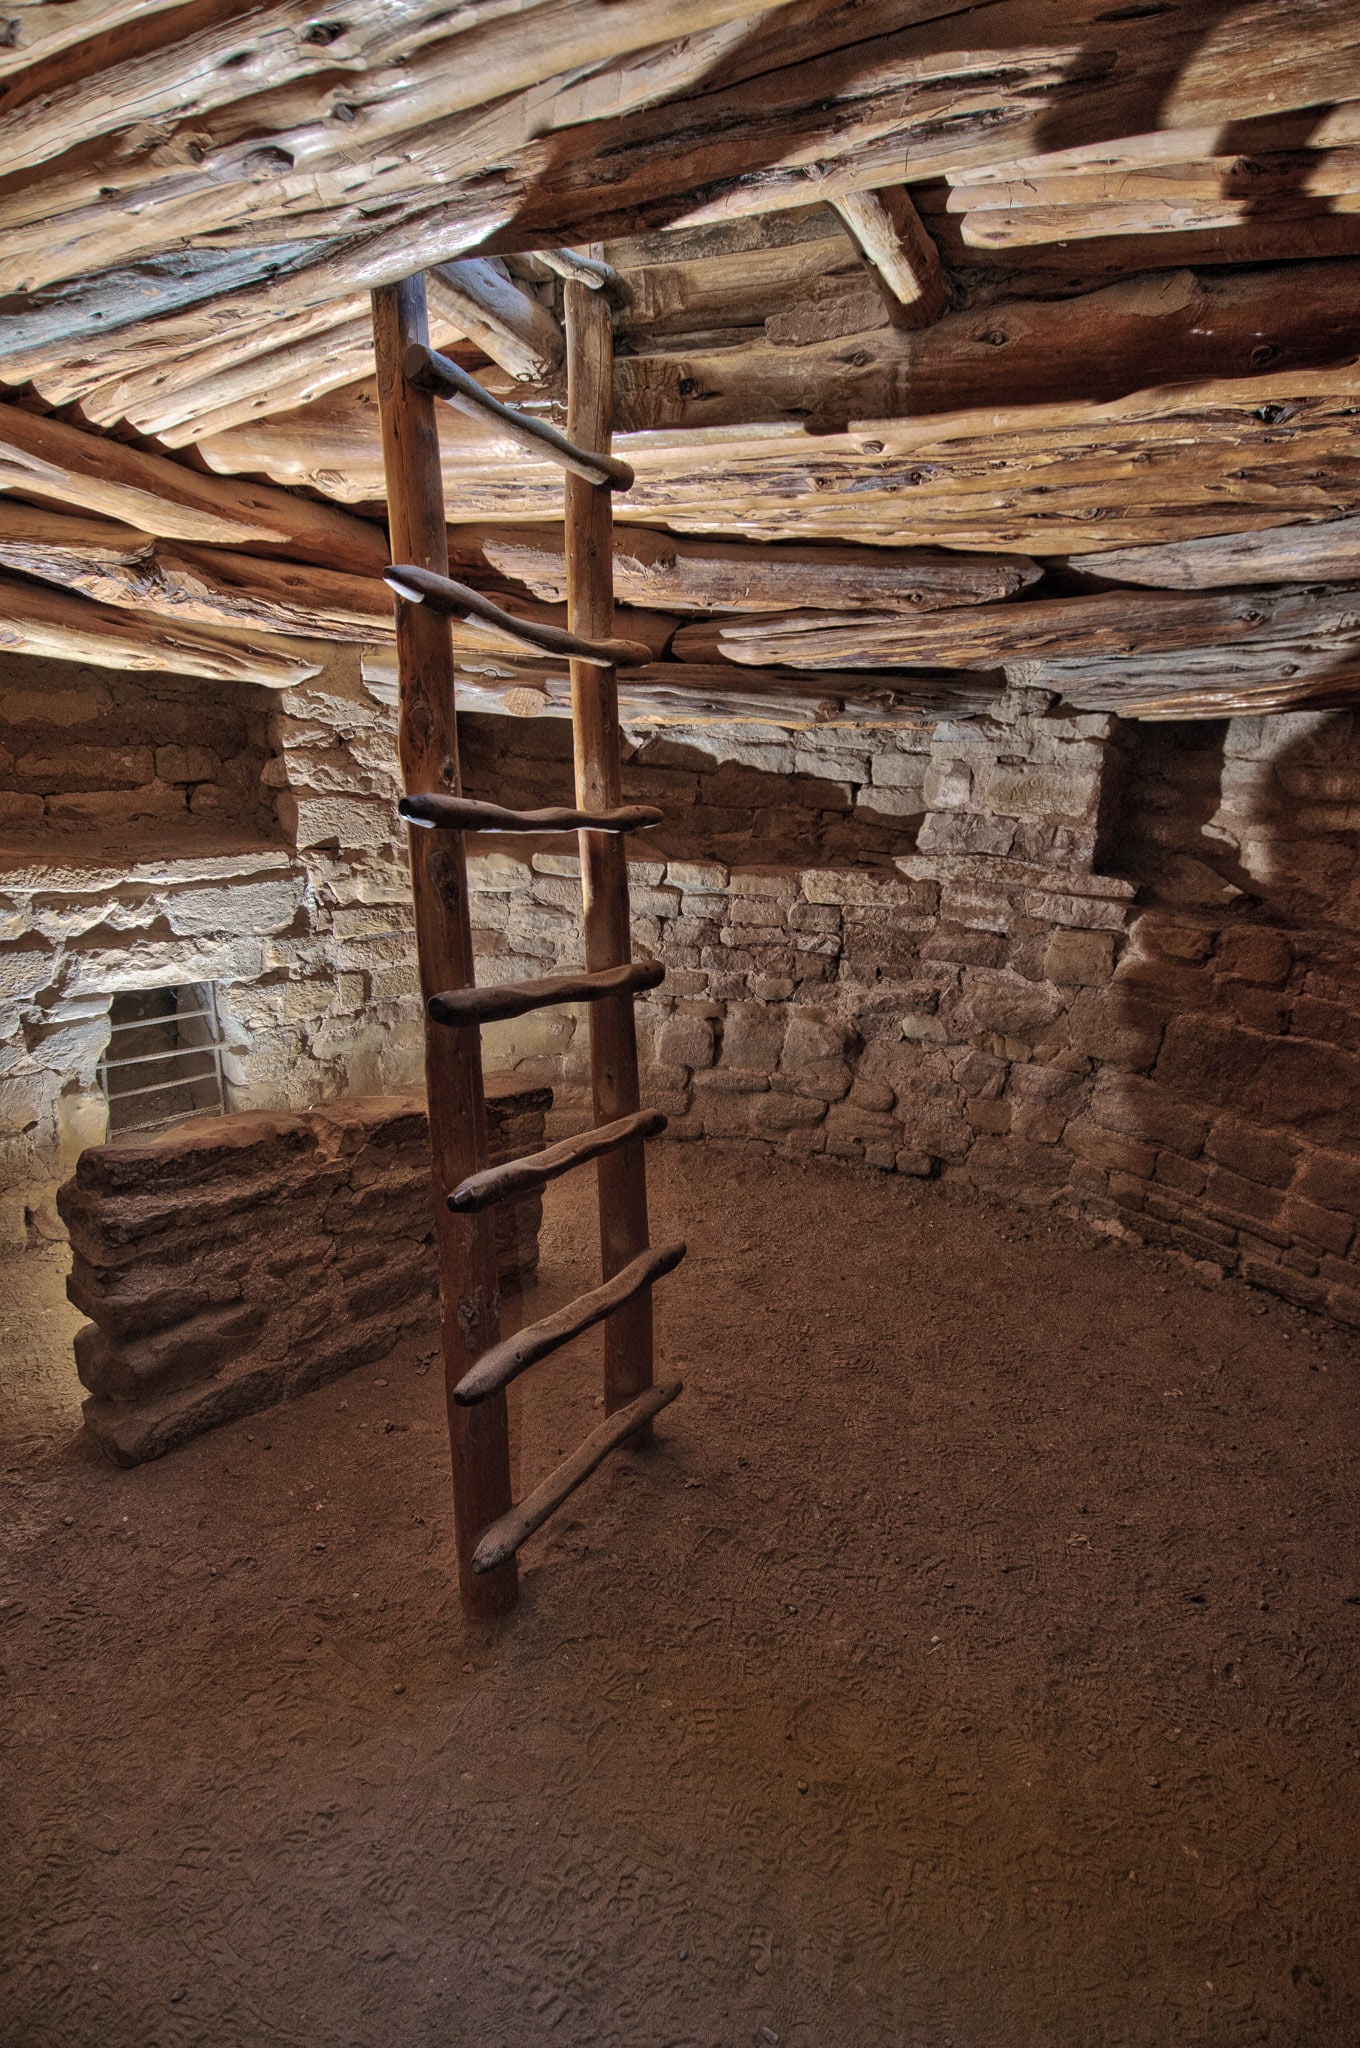 This photo was taken down in the large kiva at Spruce House in Mesa Verde National Park near Cortez and Durango, Colorado.